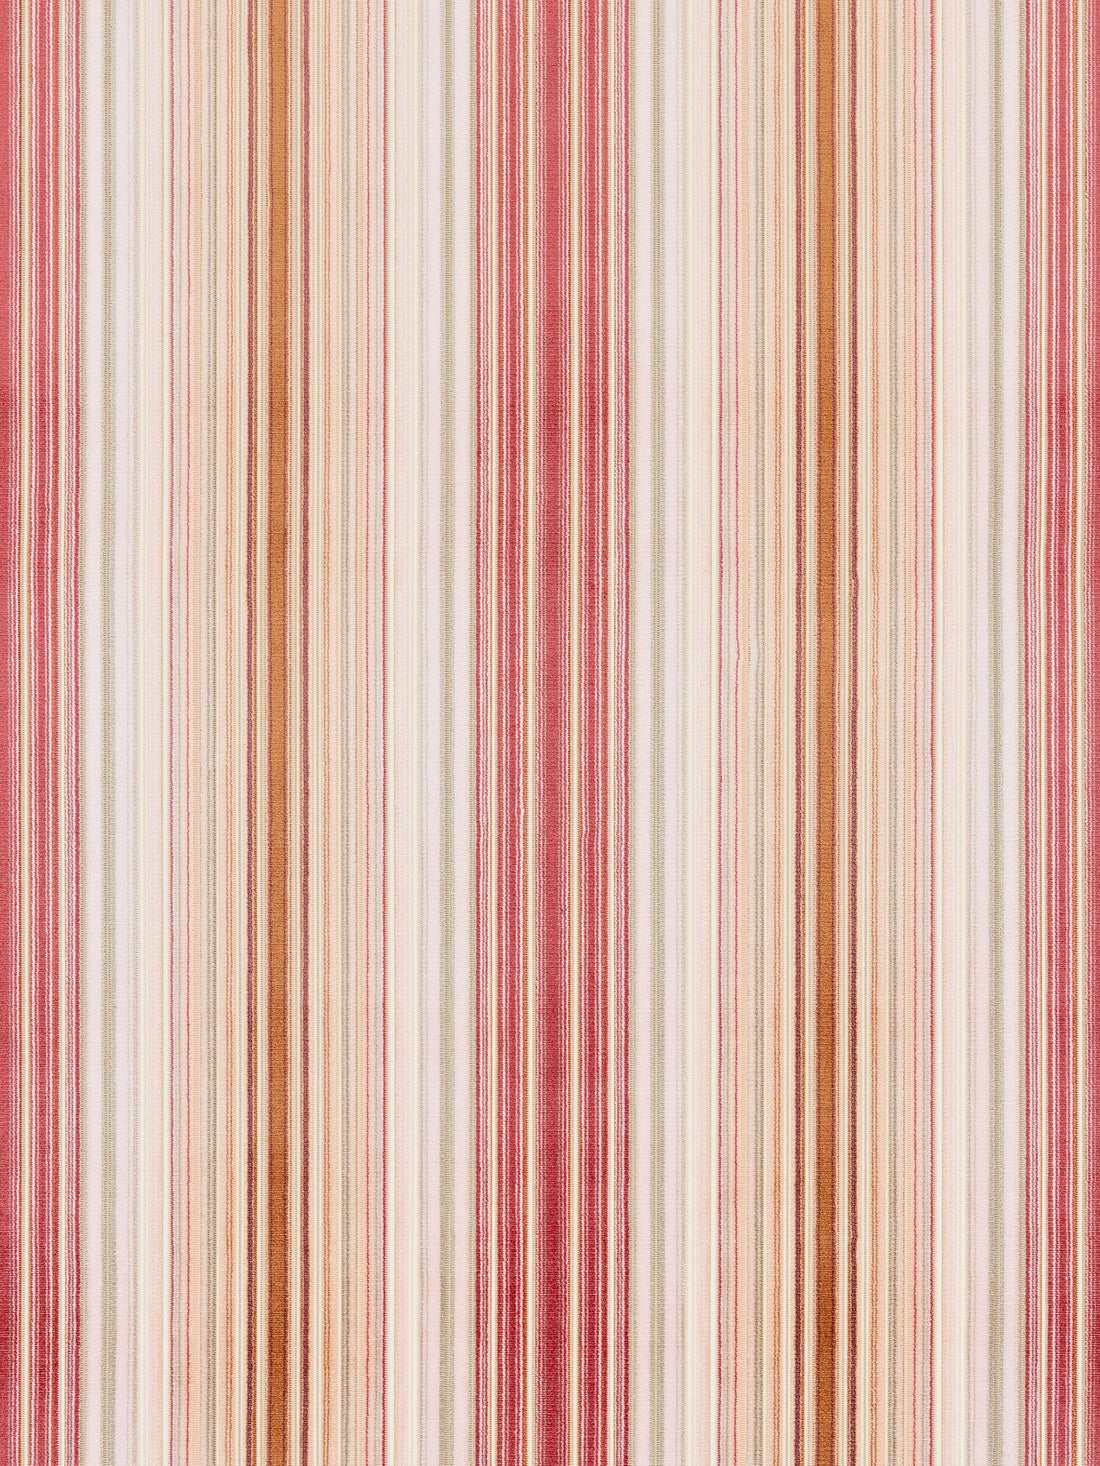 Timberlake Velvet fabric in rose apricot color - pattern number JM 00060592 - by Scalamandre in the Old World Weavers collection